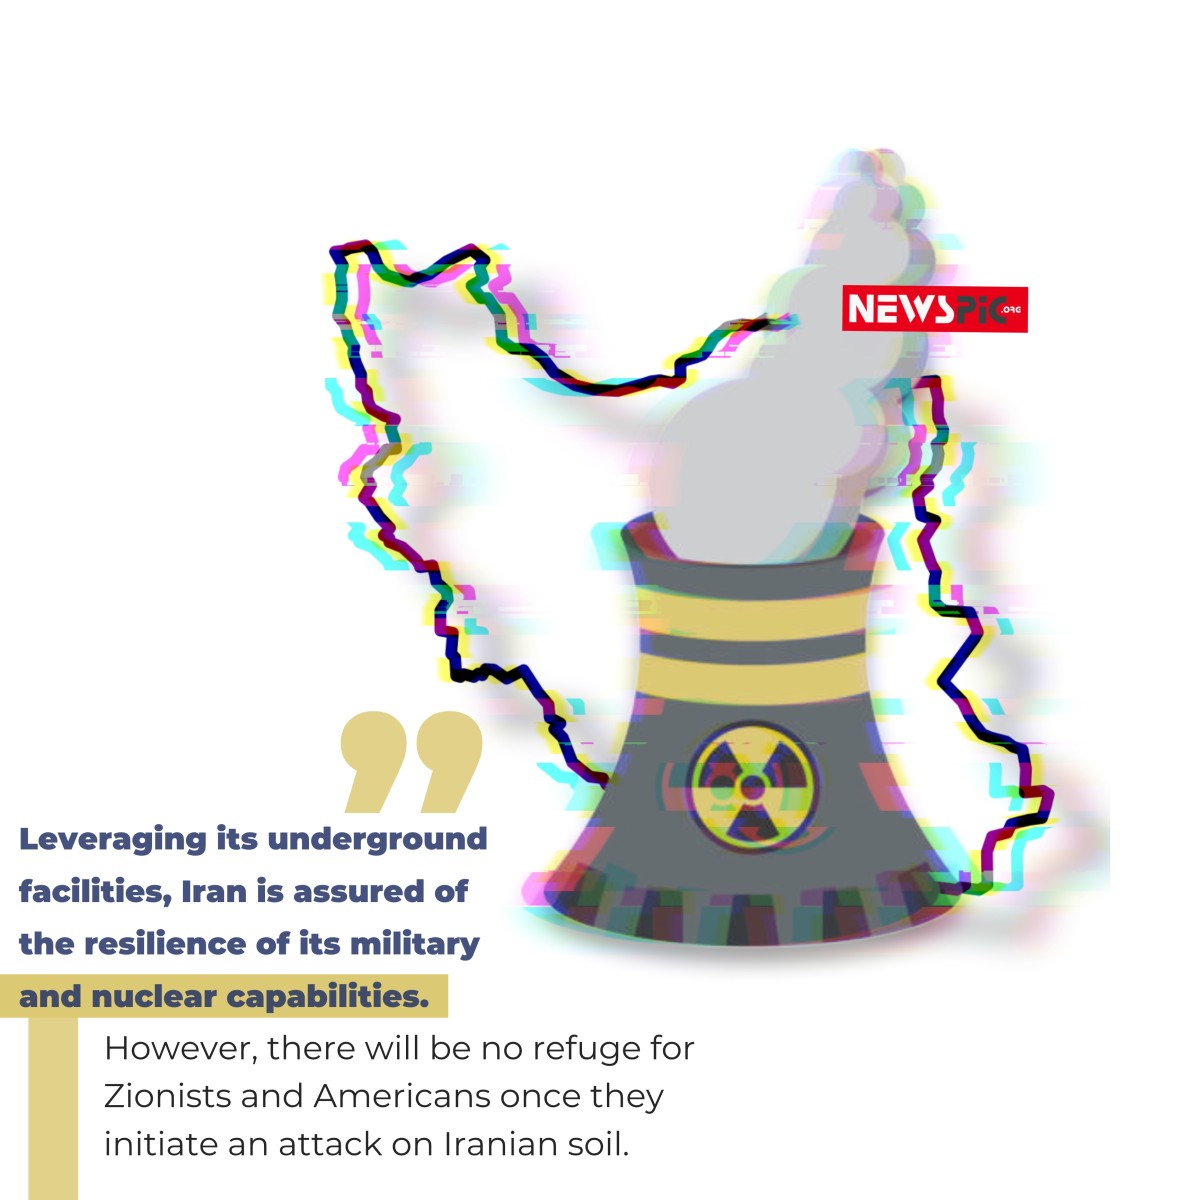 Leveraging its underground facilities, Iran is assured of the resilience of its military and nuclear capabilities.